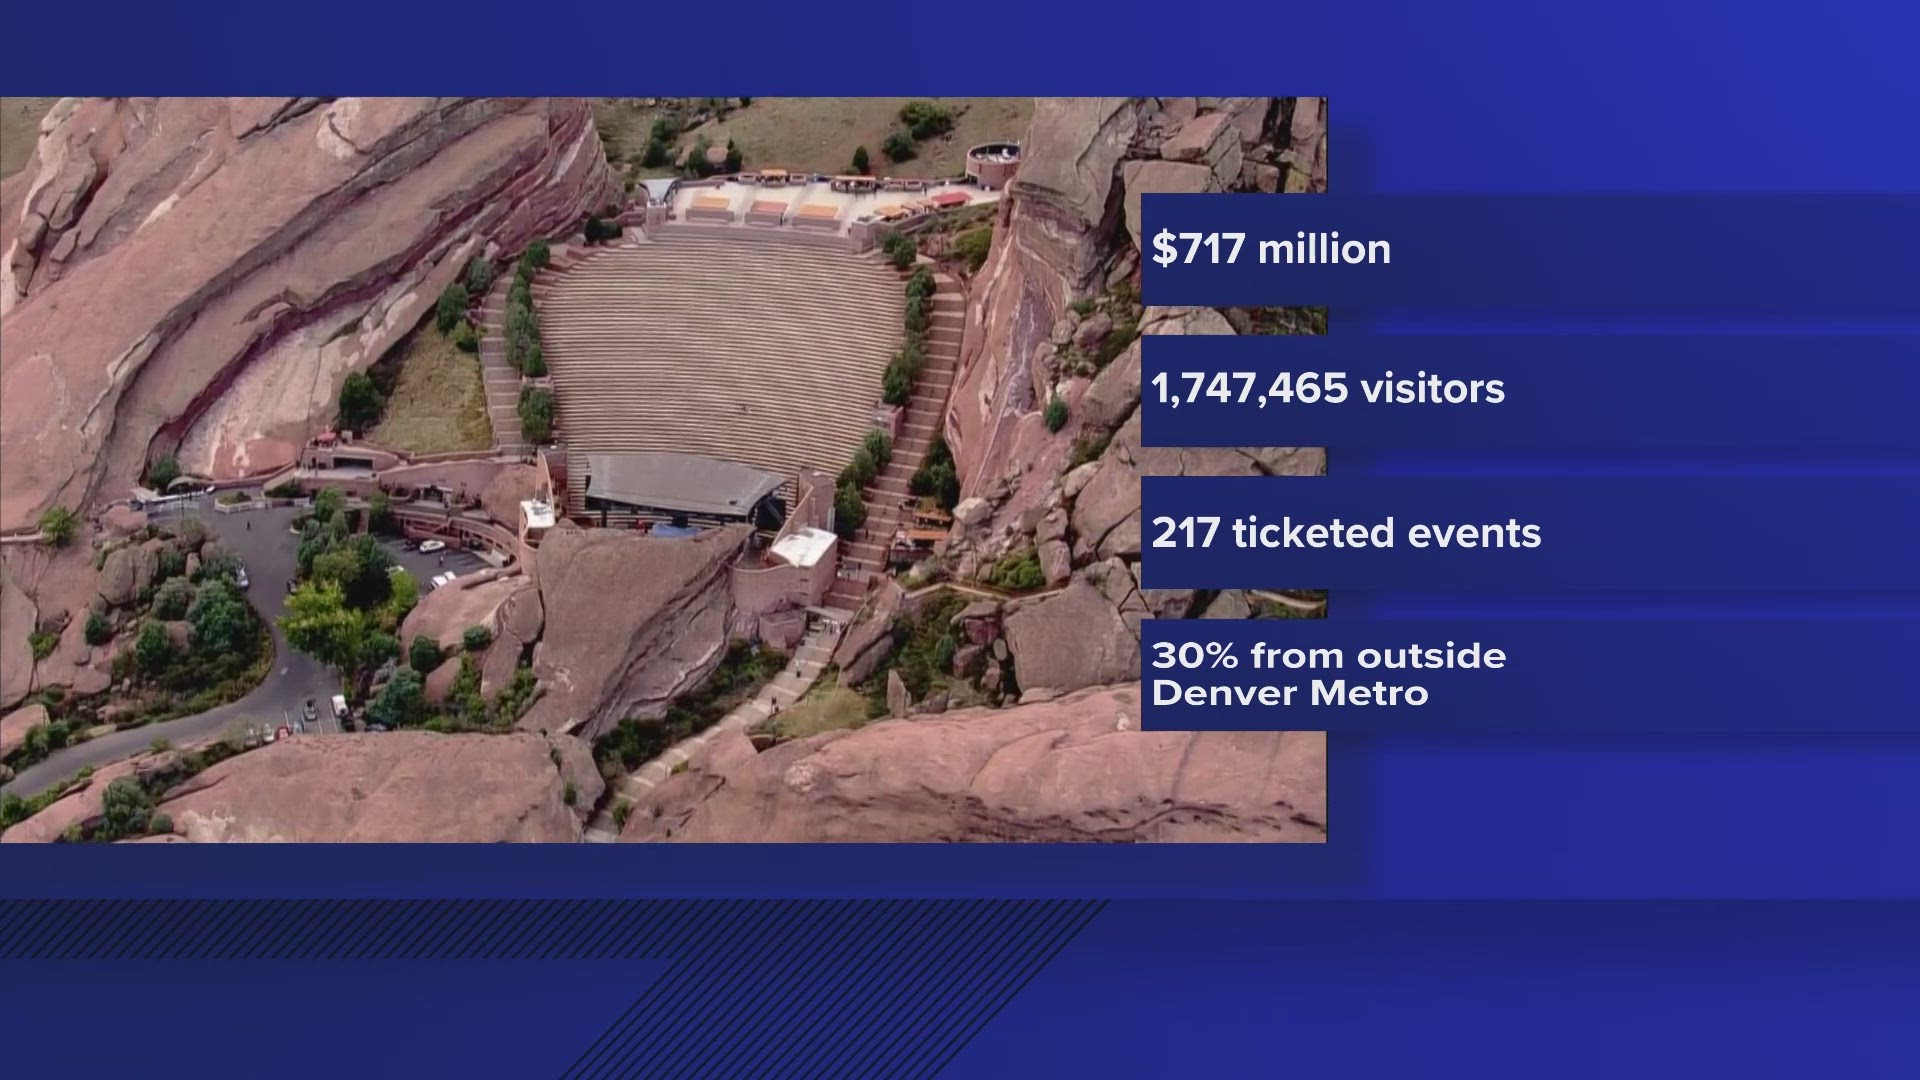 A study by BBC Research and Consulting found Red Rocks had a $717 million regional impact in 2022.